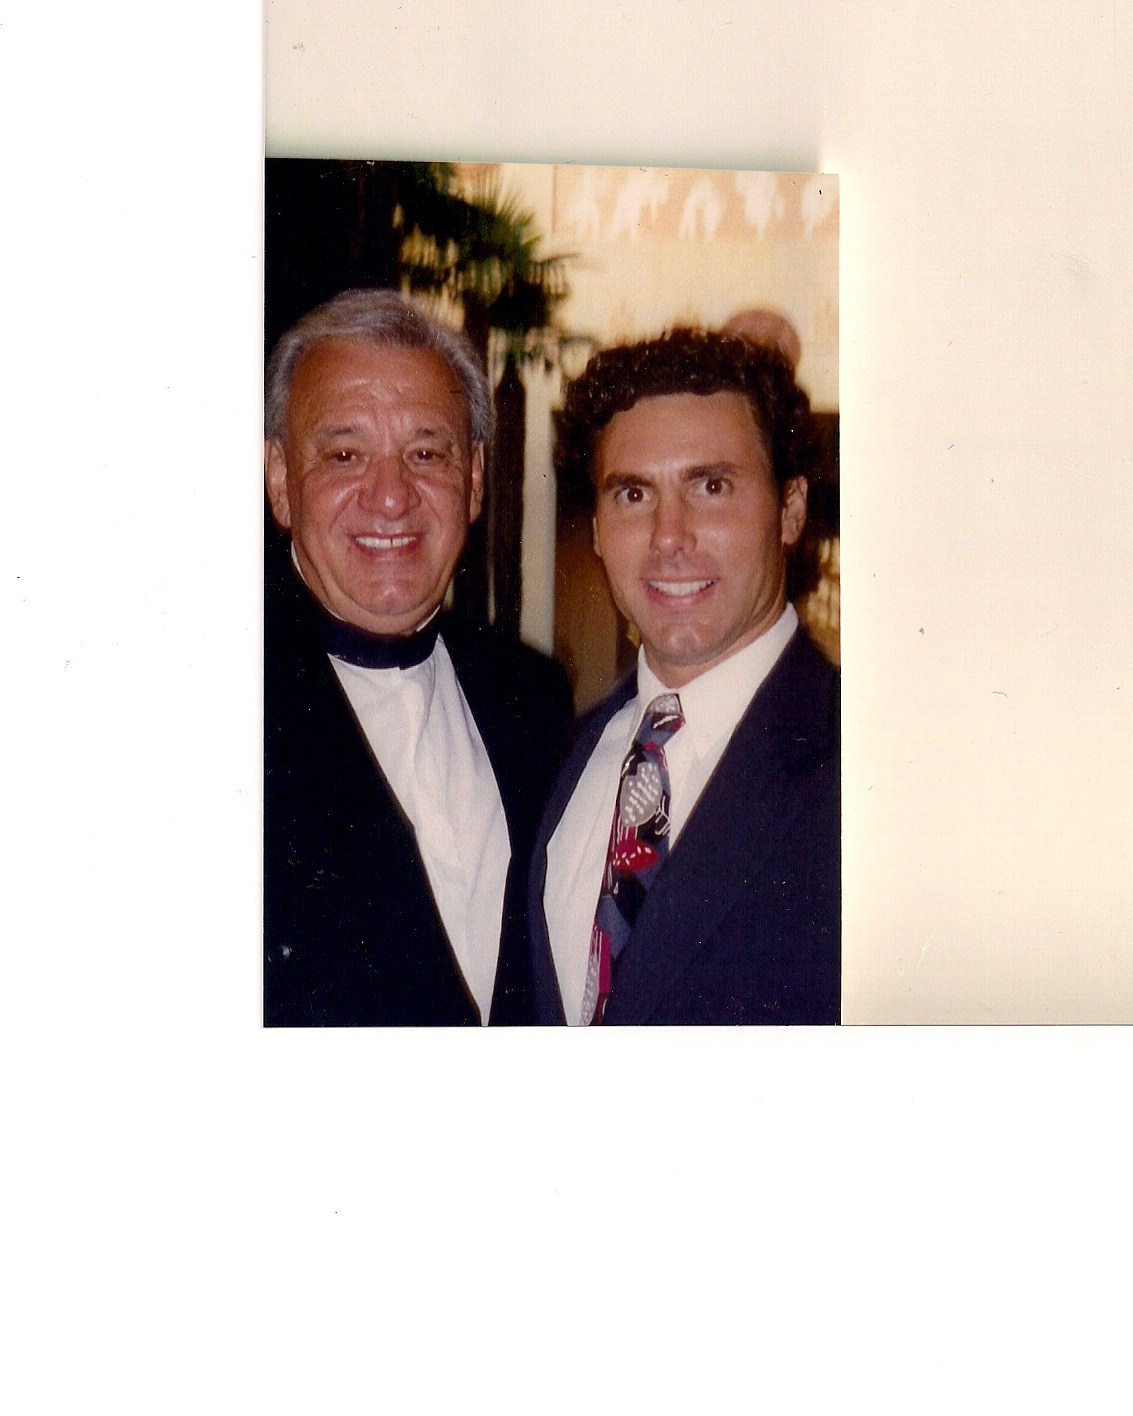 Pat with his Father, Paul Tanzillo at the LA Weekly Theater Award Show at the Alex Theatre in Glendale, 1996.